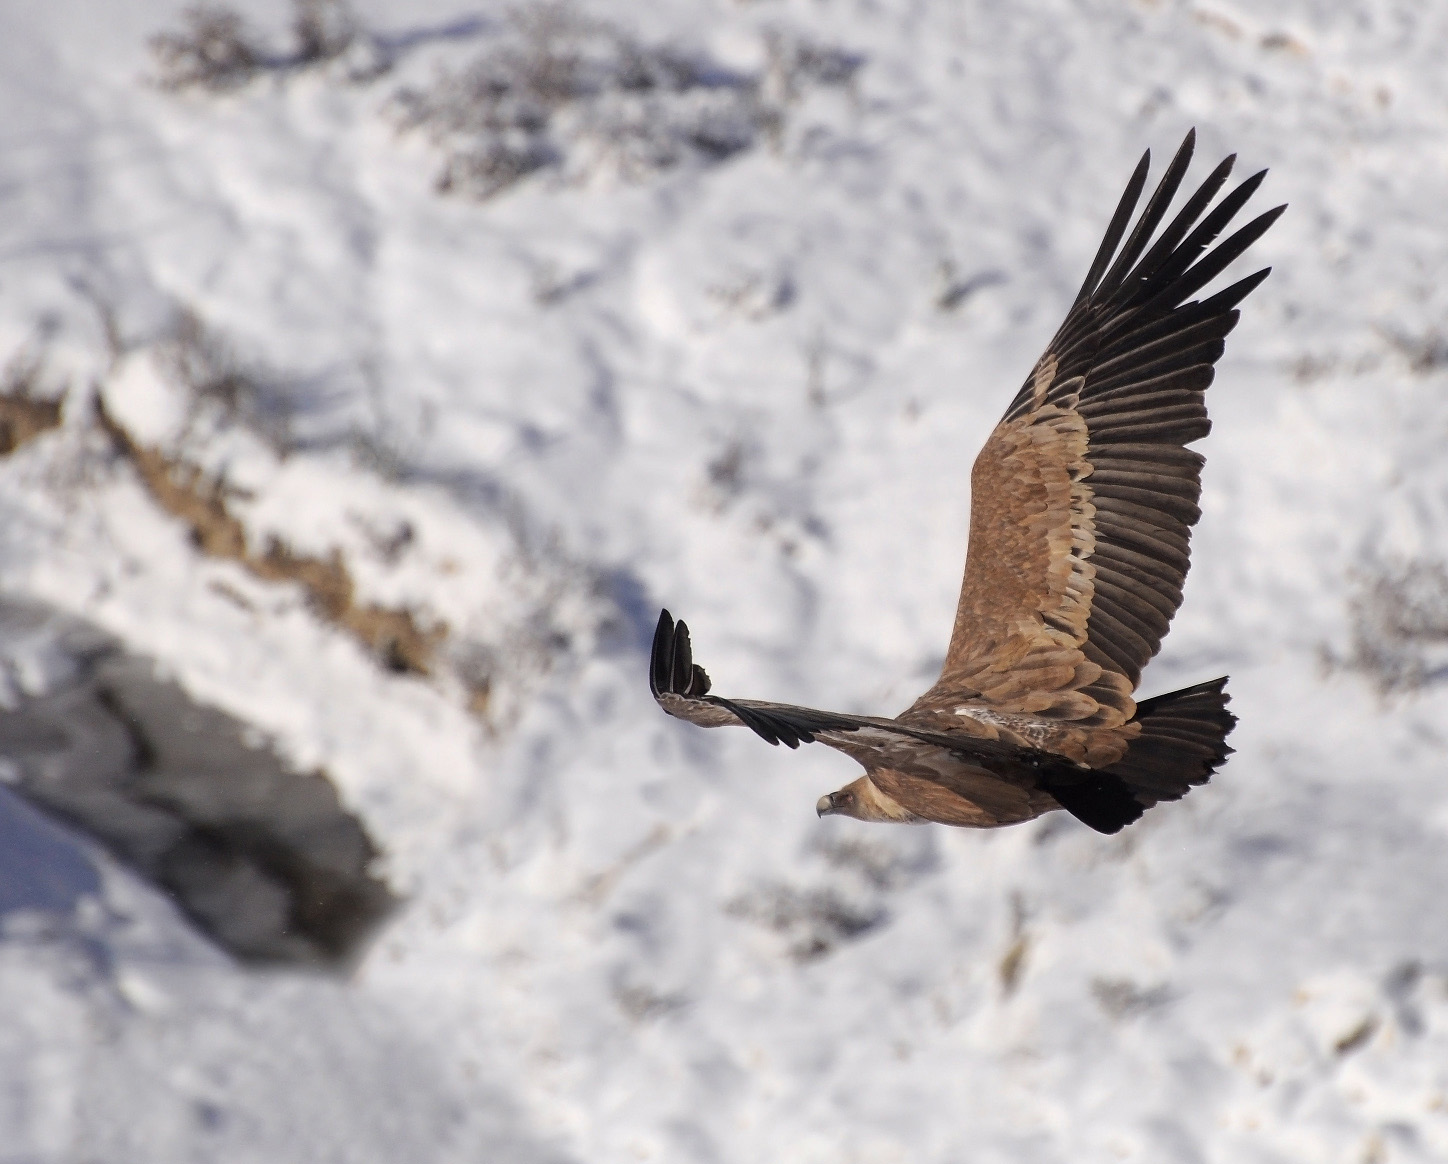 Griffon vulture in flight on the background of the rock